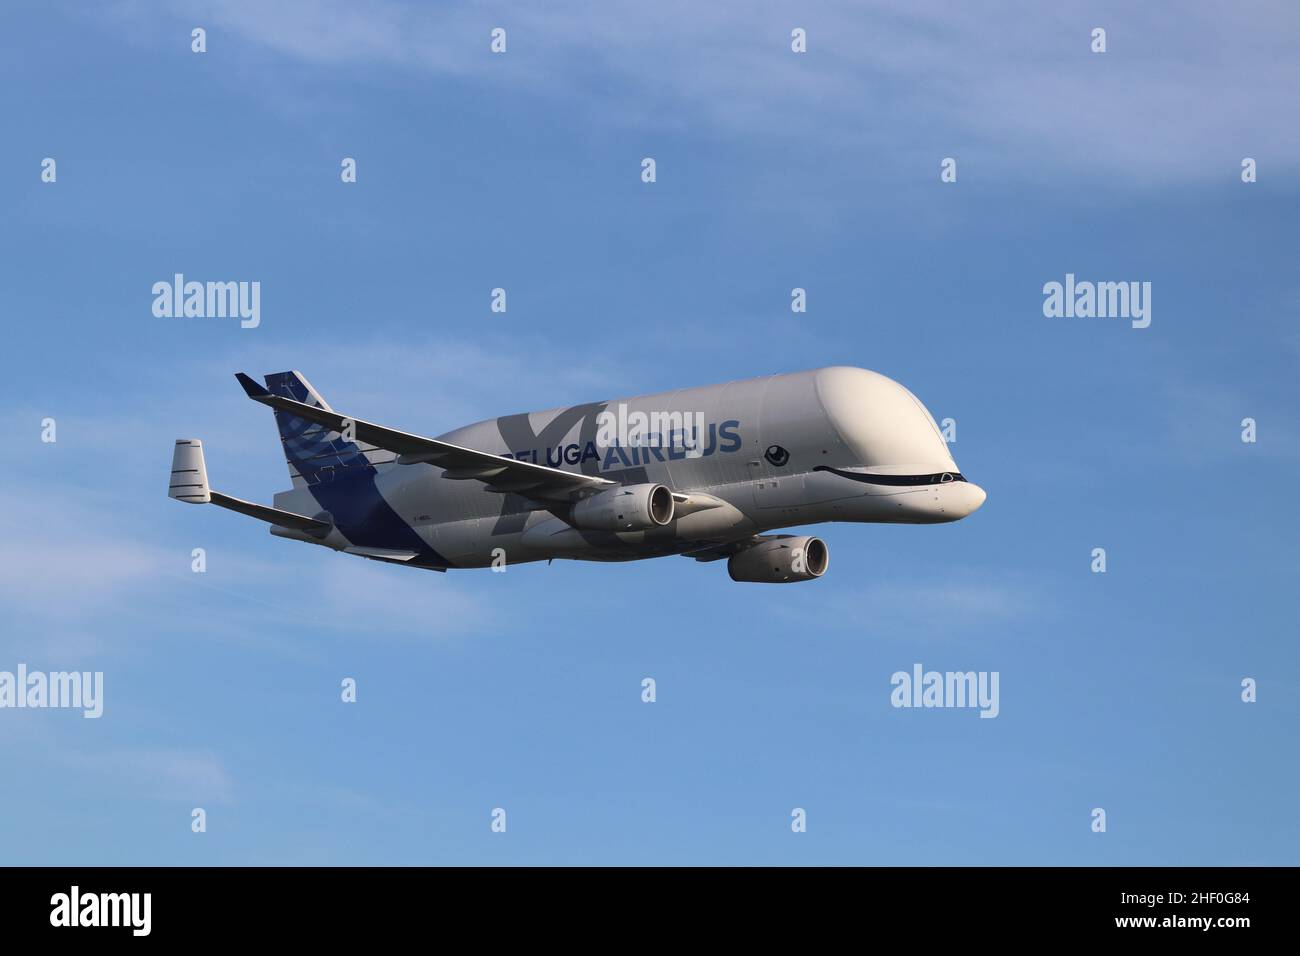 Airbus Beluga XL is a large transport aircraft based on the airbus A300-200 Freighter airline built by airbus of the movment of aircraft components Stock Photo